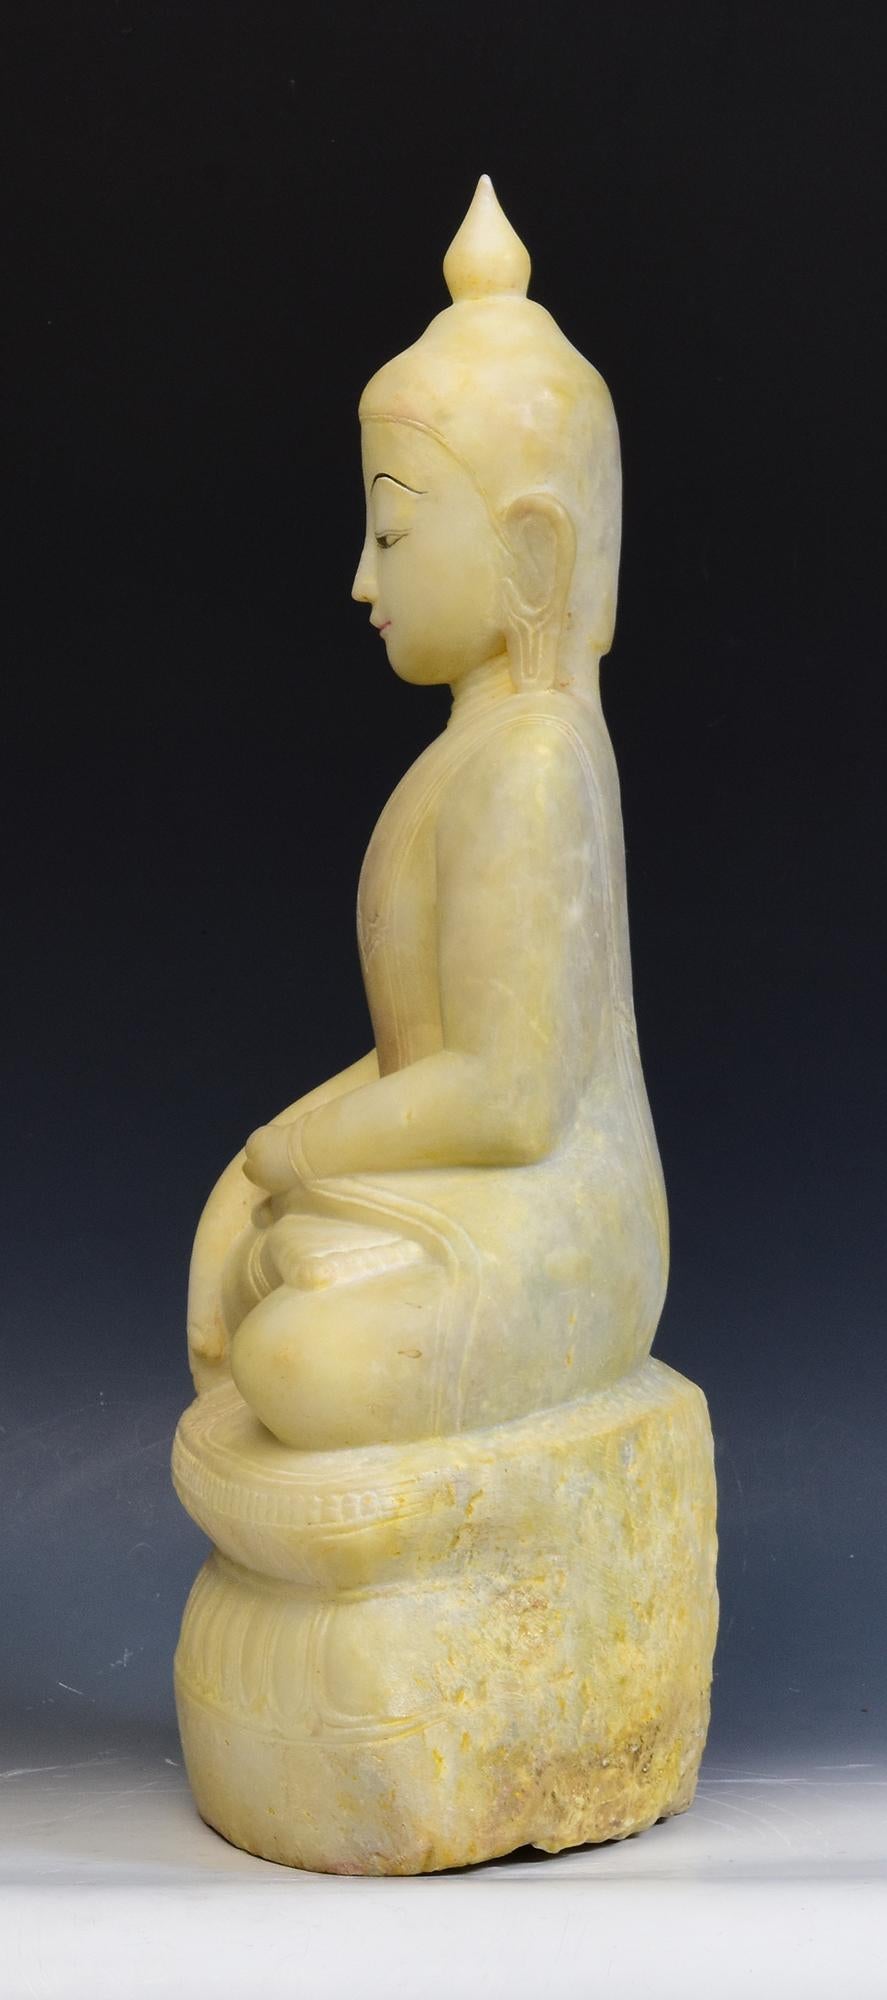 17th - 18th Century, Shan, Antique Burmese Alabaster Marble Seated Buddha Statue 4